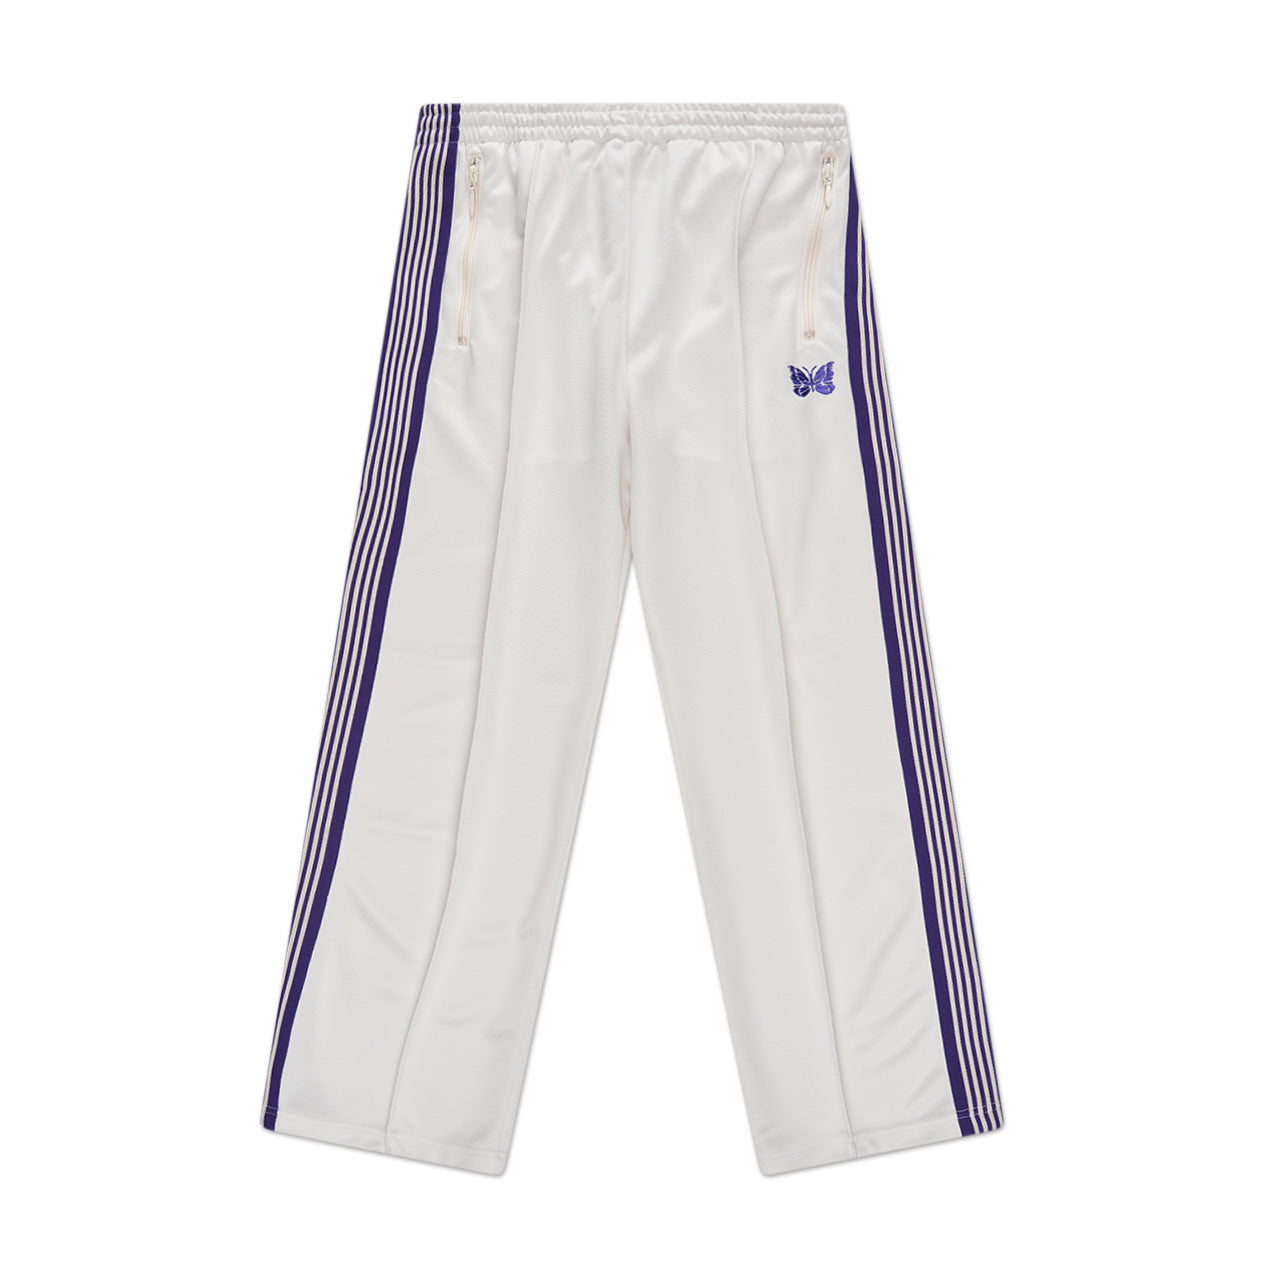 needles side stripe track pants (ice white) - a.plus store